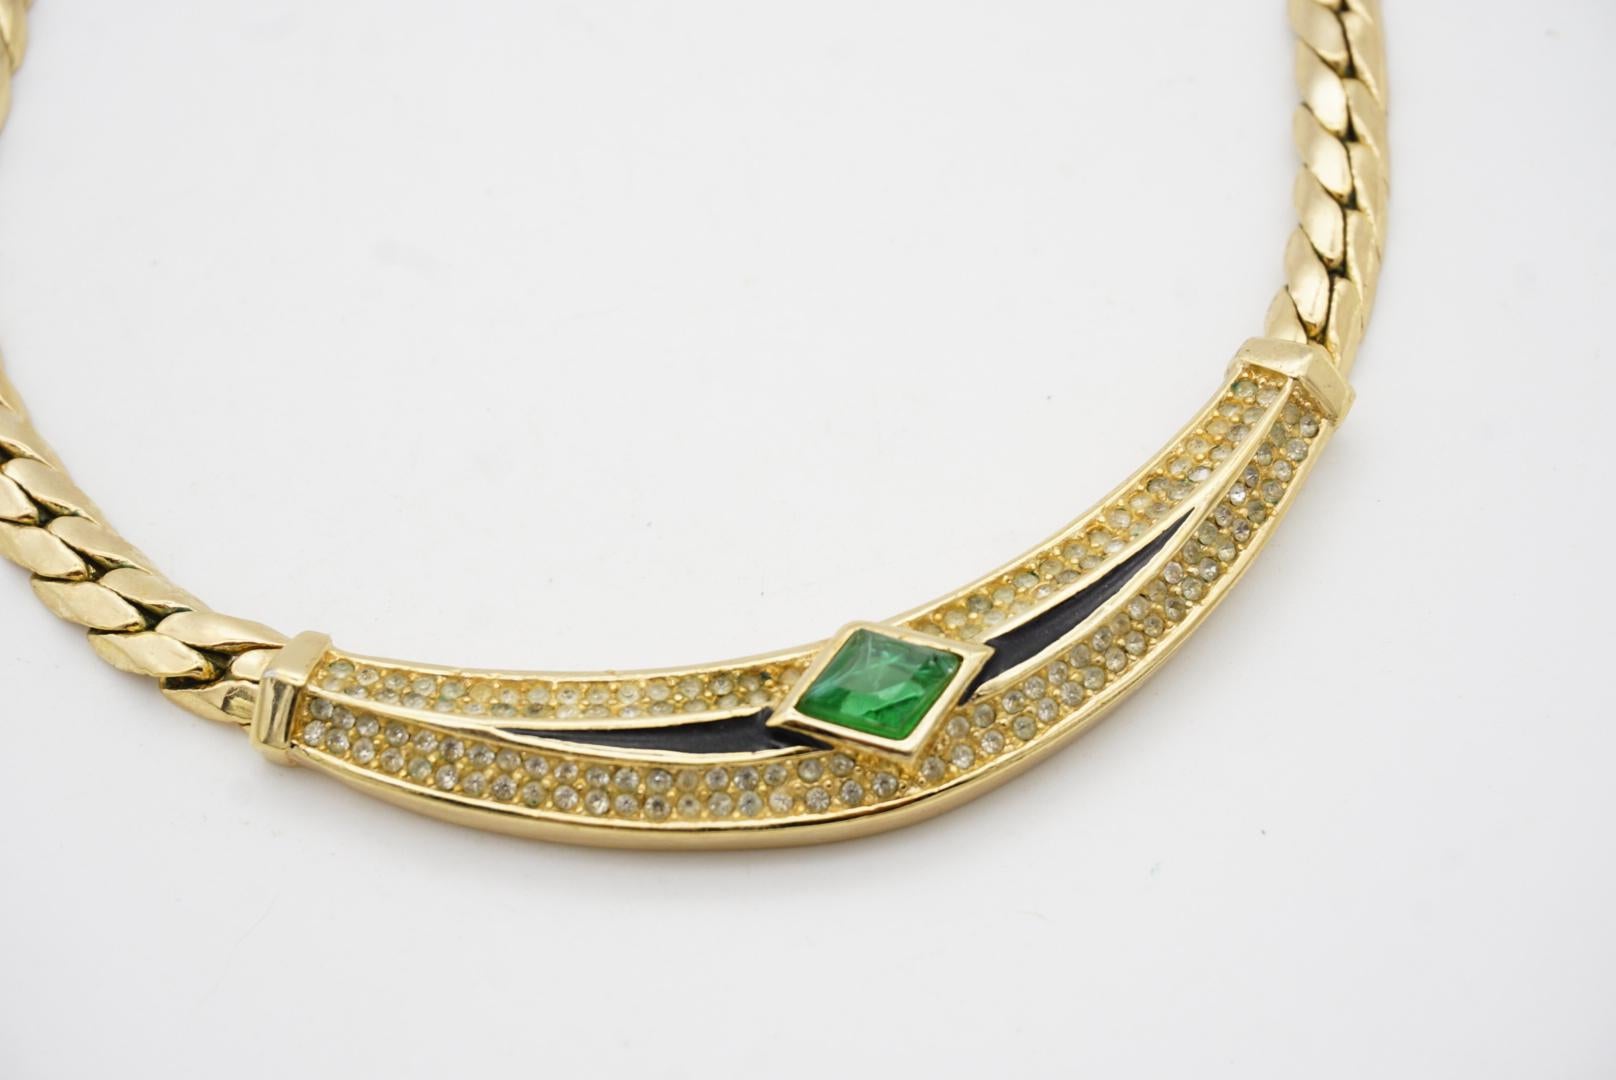 Christian Dior Vintage 1980s Emerald Green Gripoix Black Crystals Gold Necklace For Sale 5